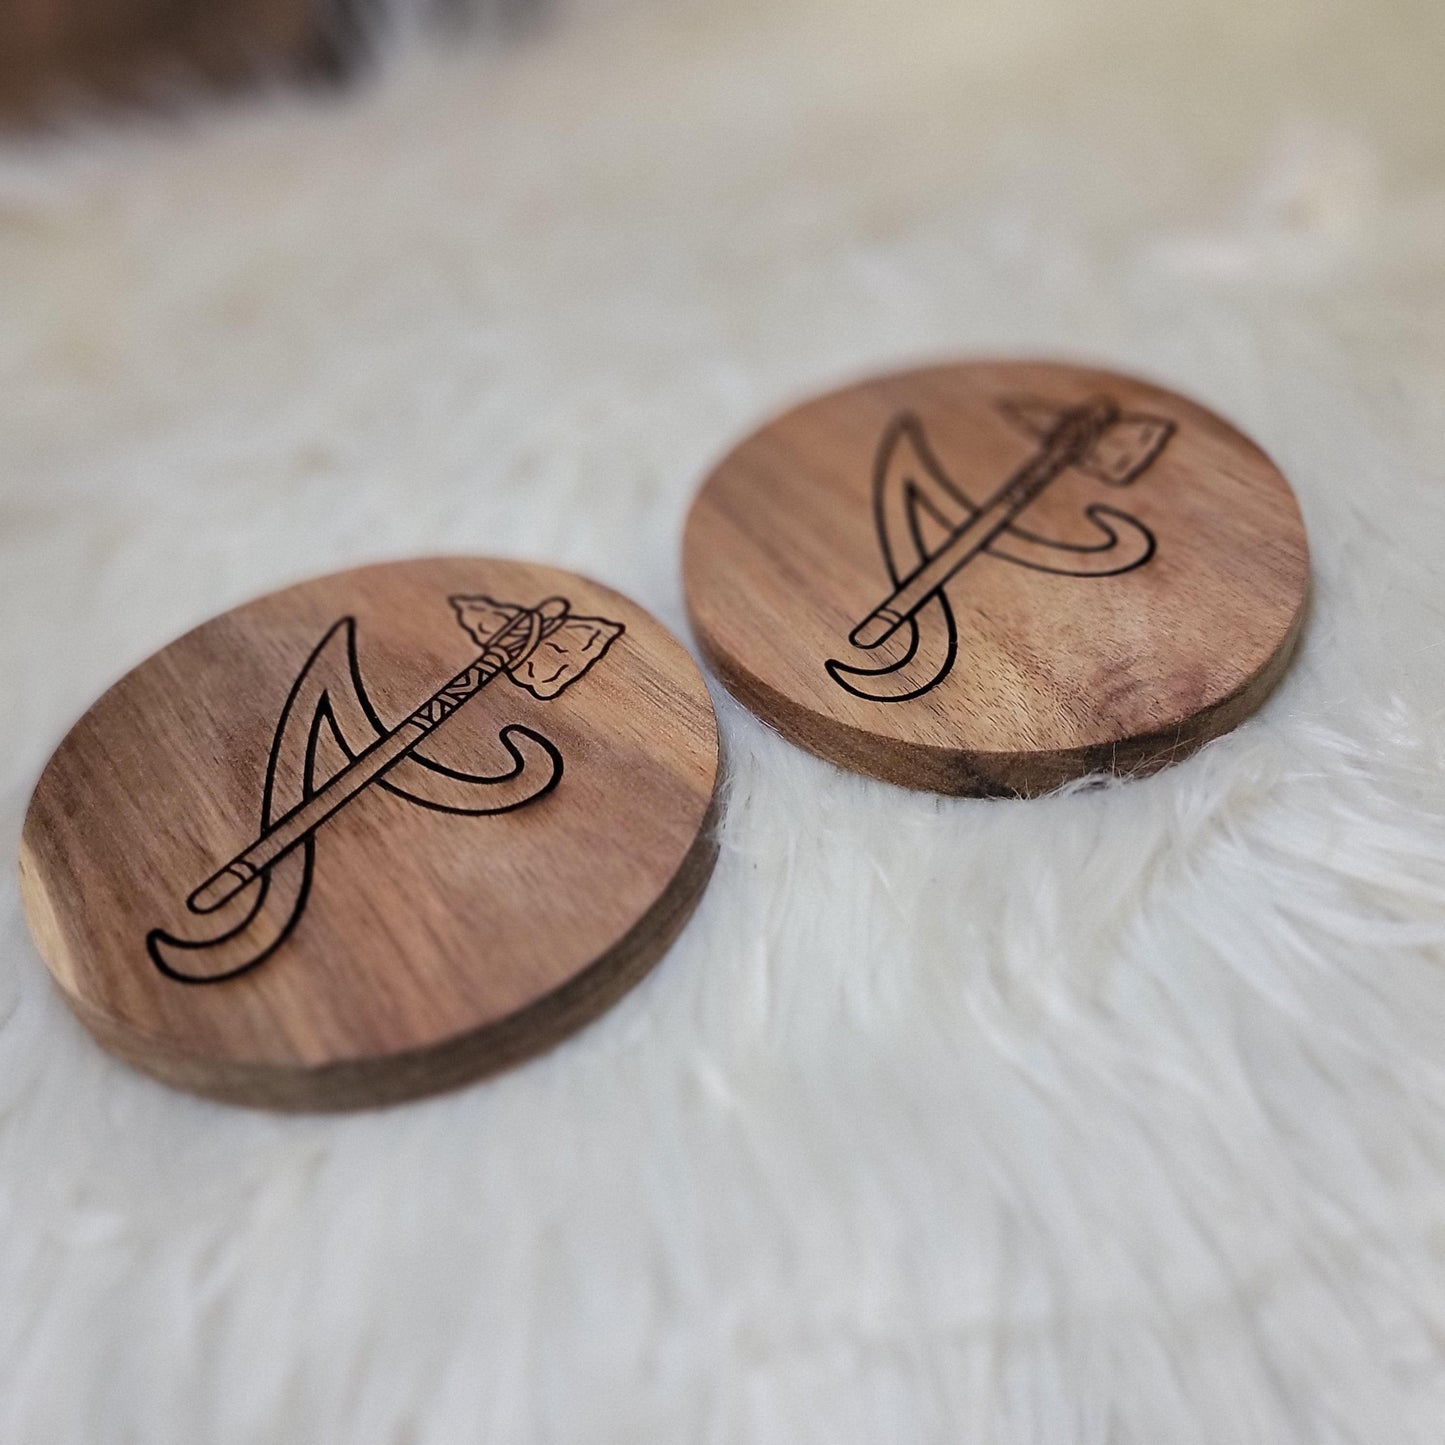 Braves Inspired Coasters